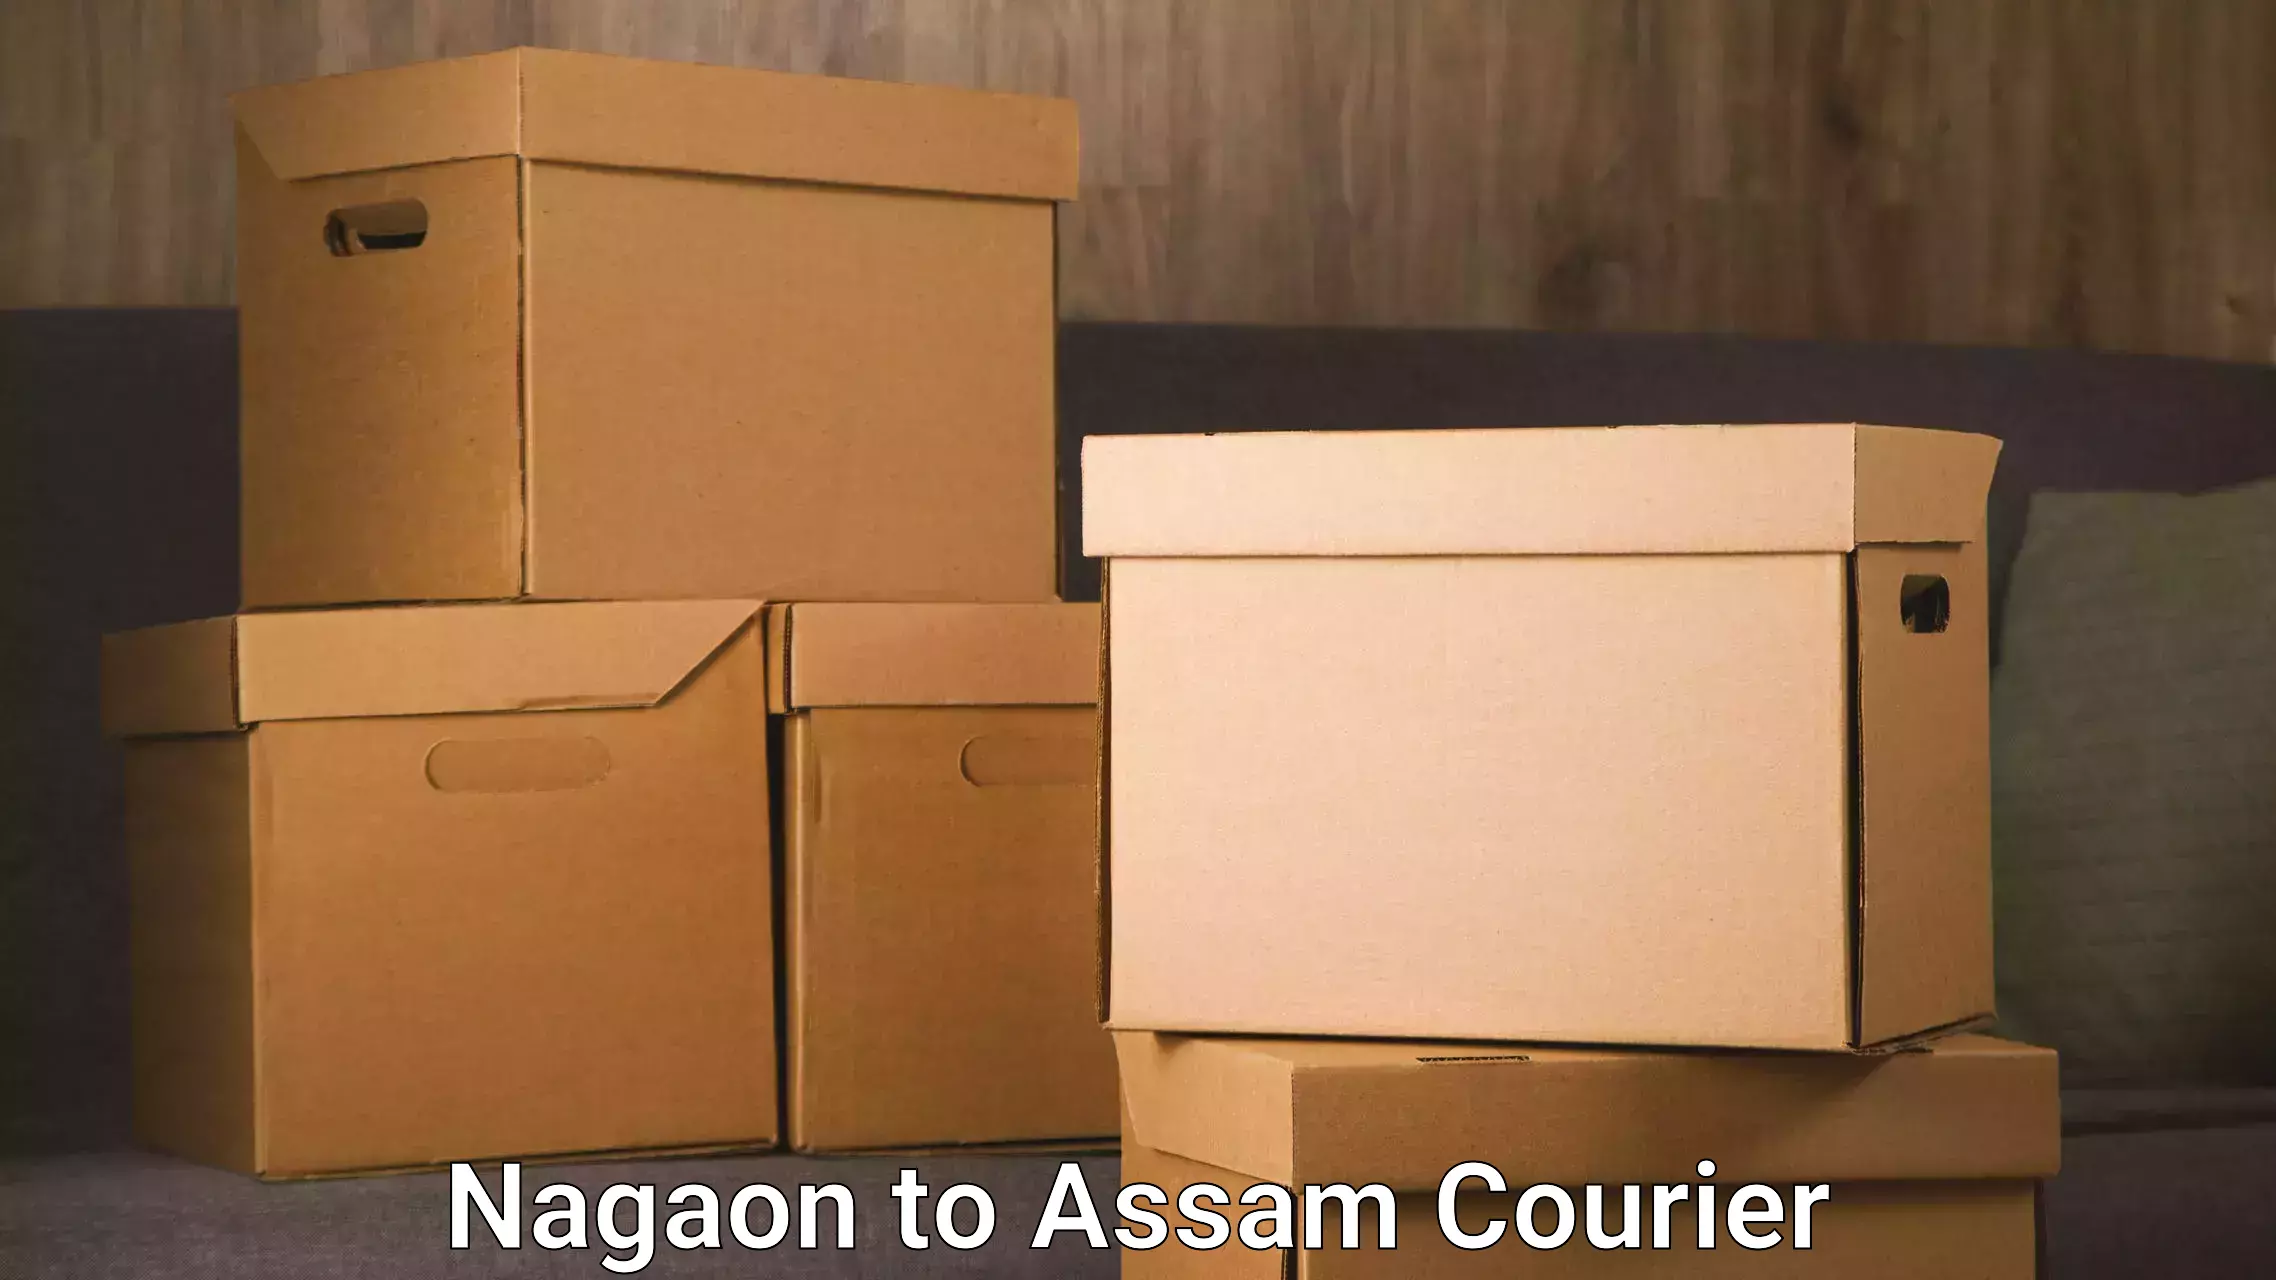 Express courier capabilities Nagaon to Boko